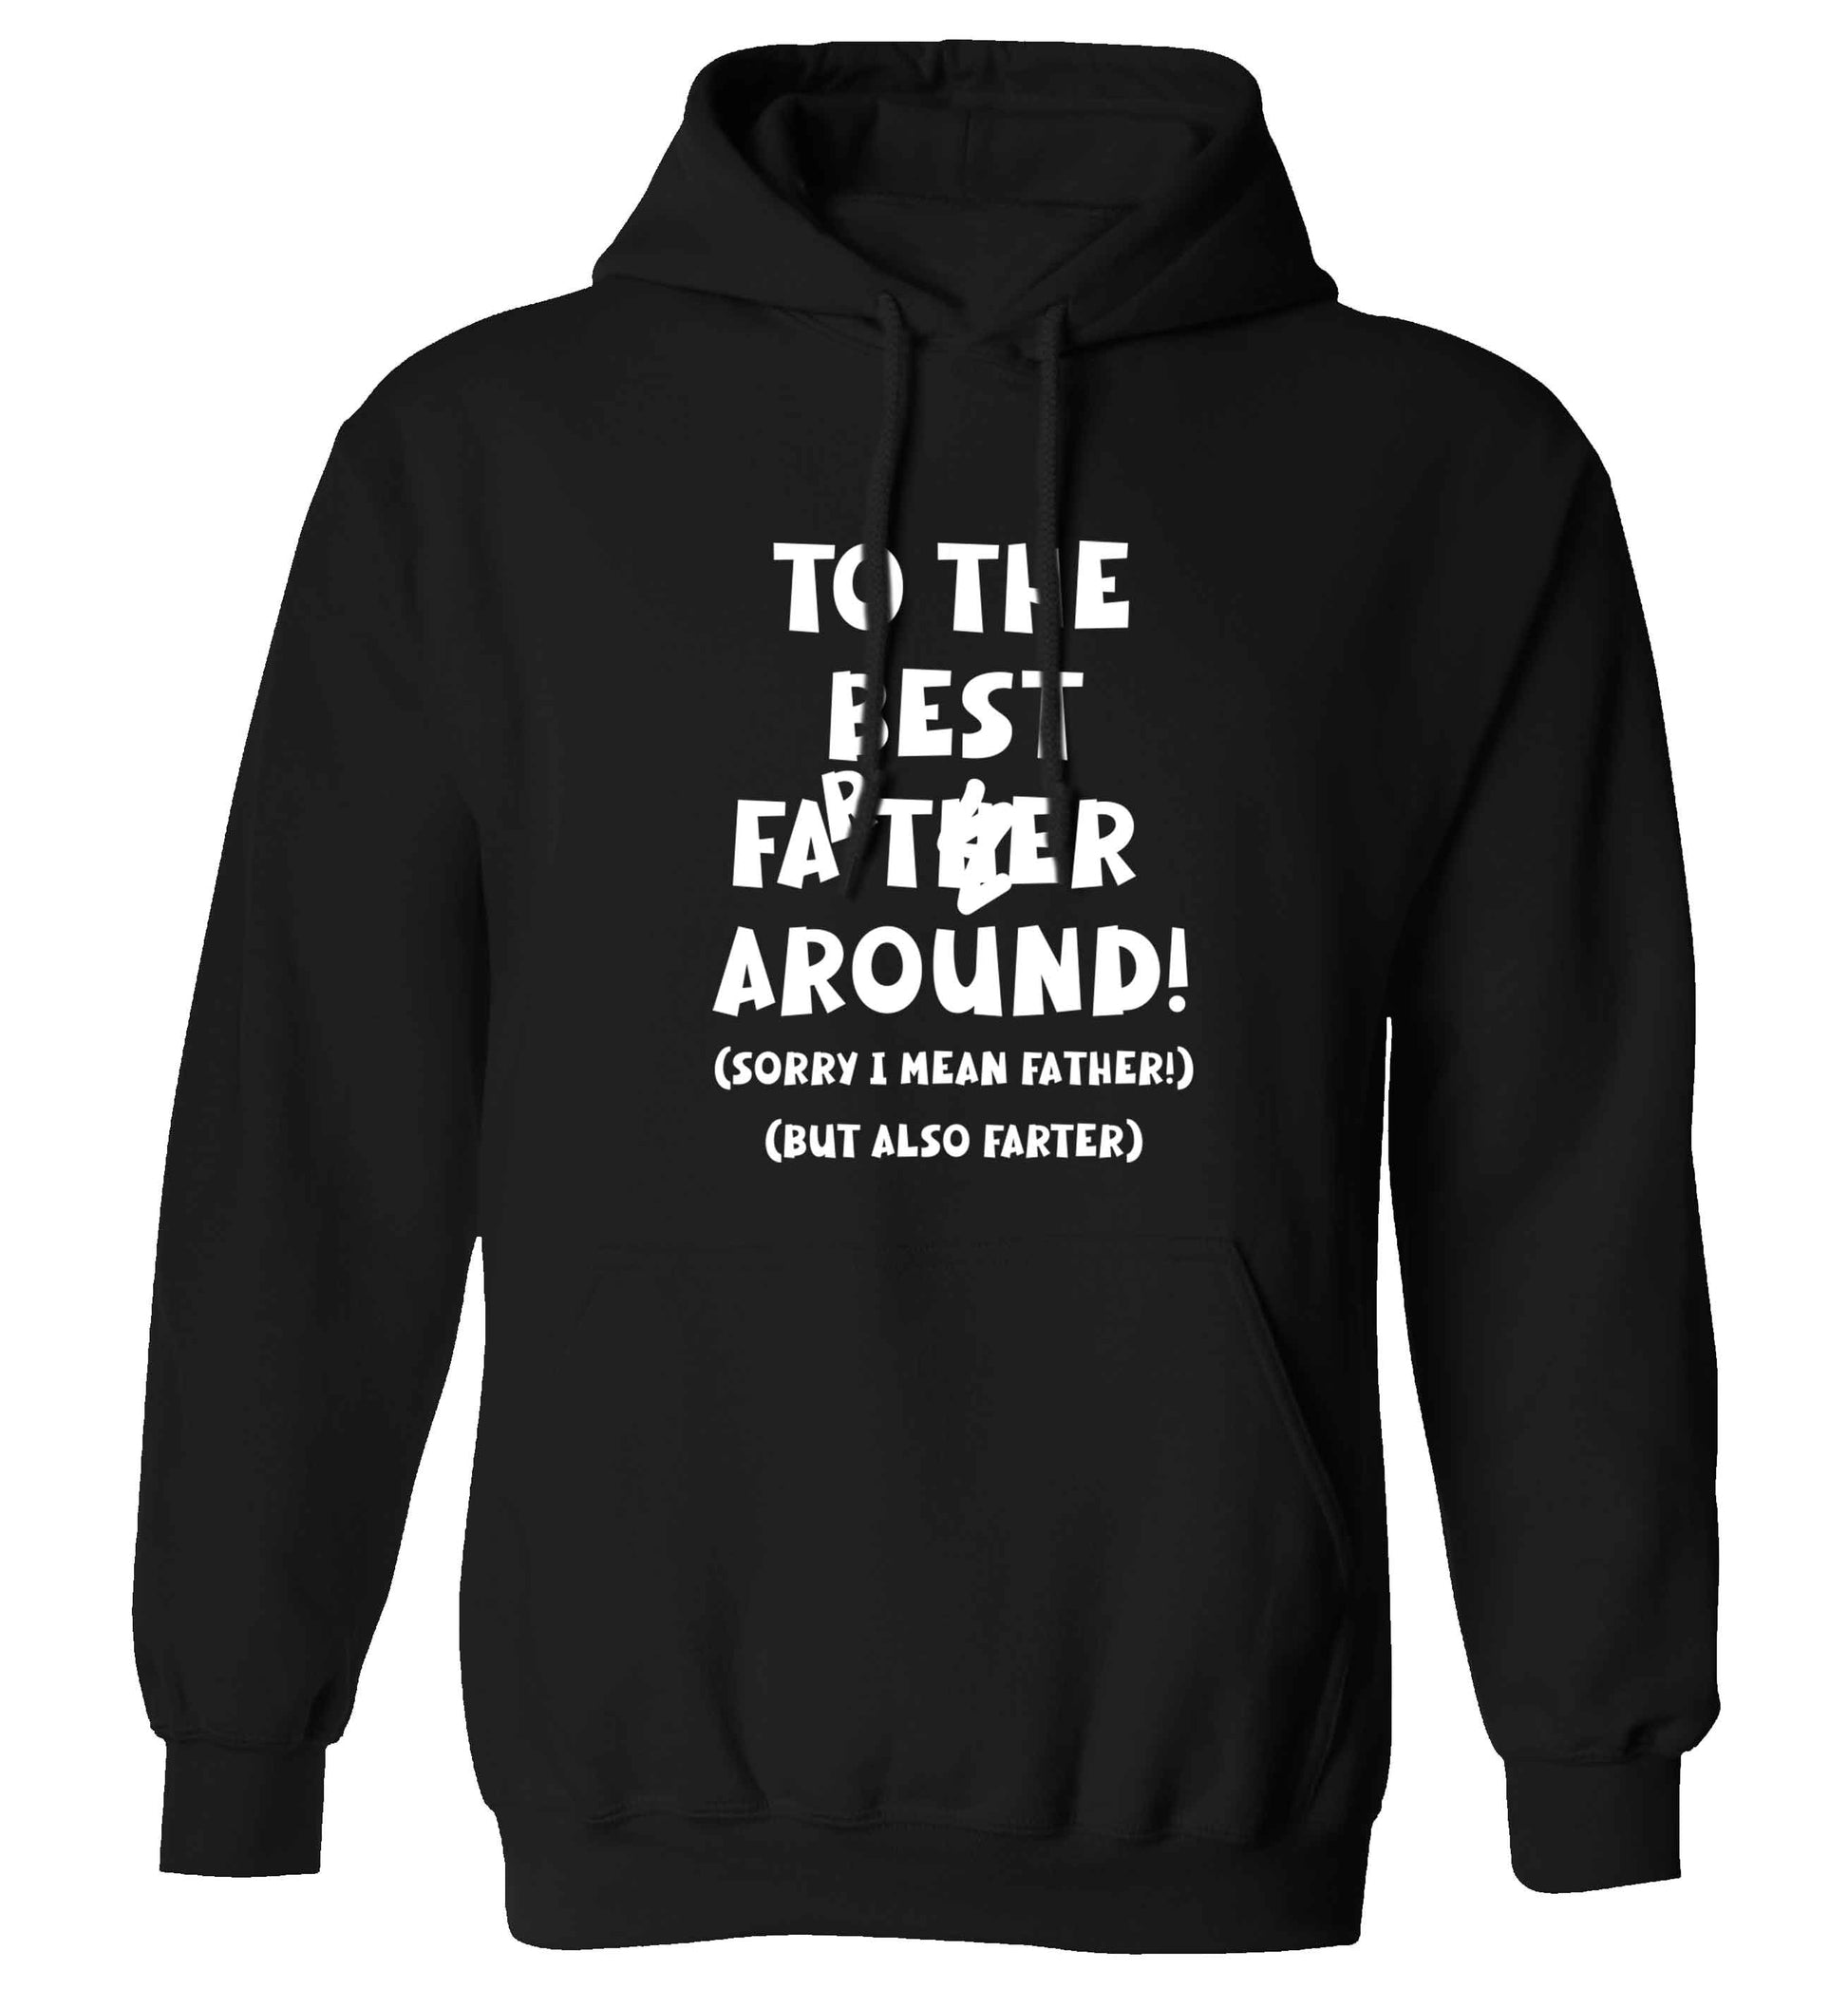 To the best farter around! Sorry I mean father, but also farter adults unisex black hoodie 2XL